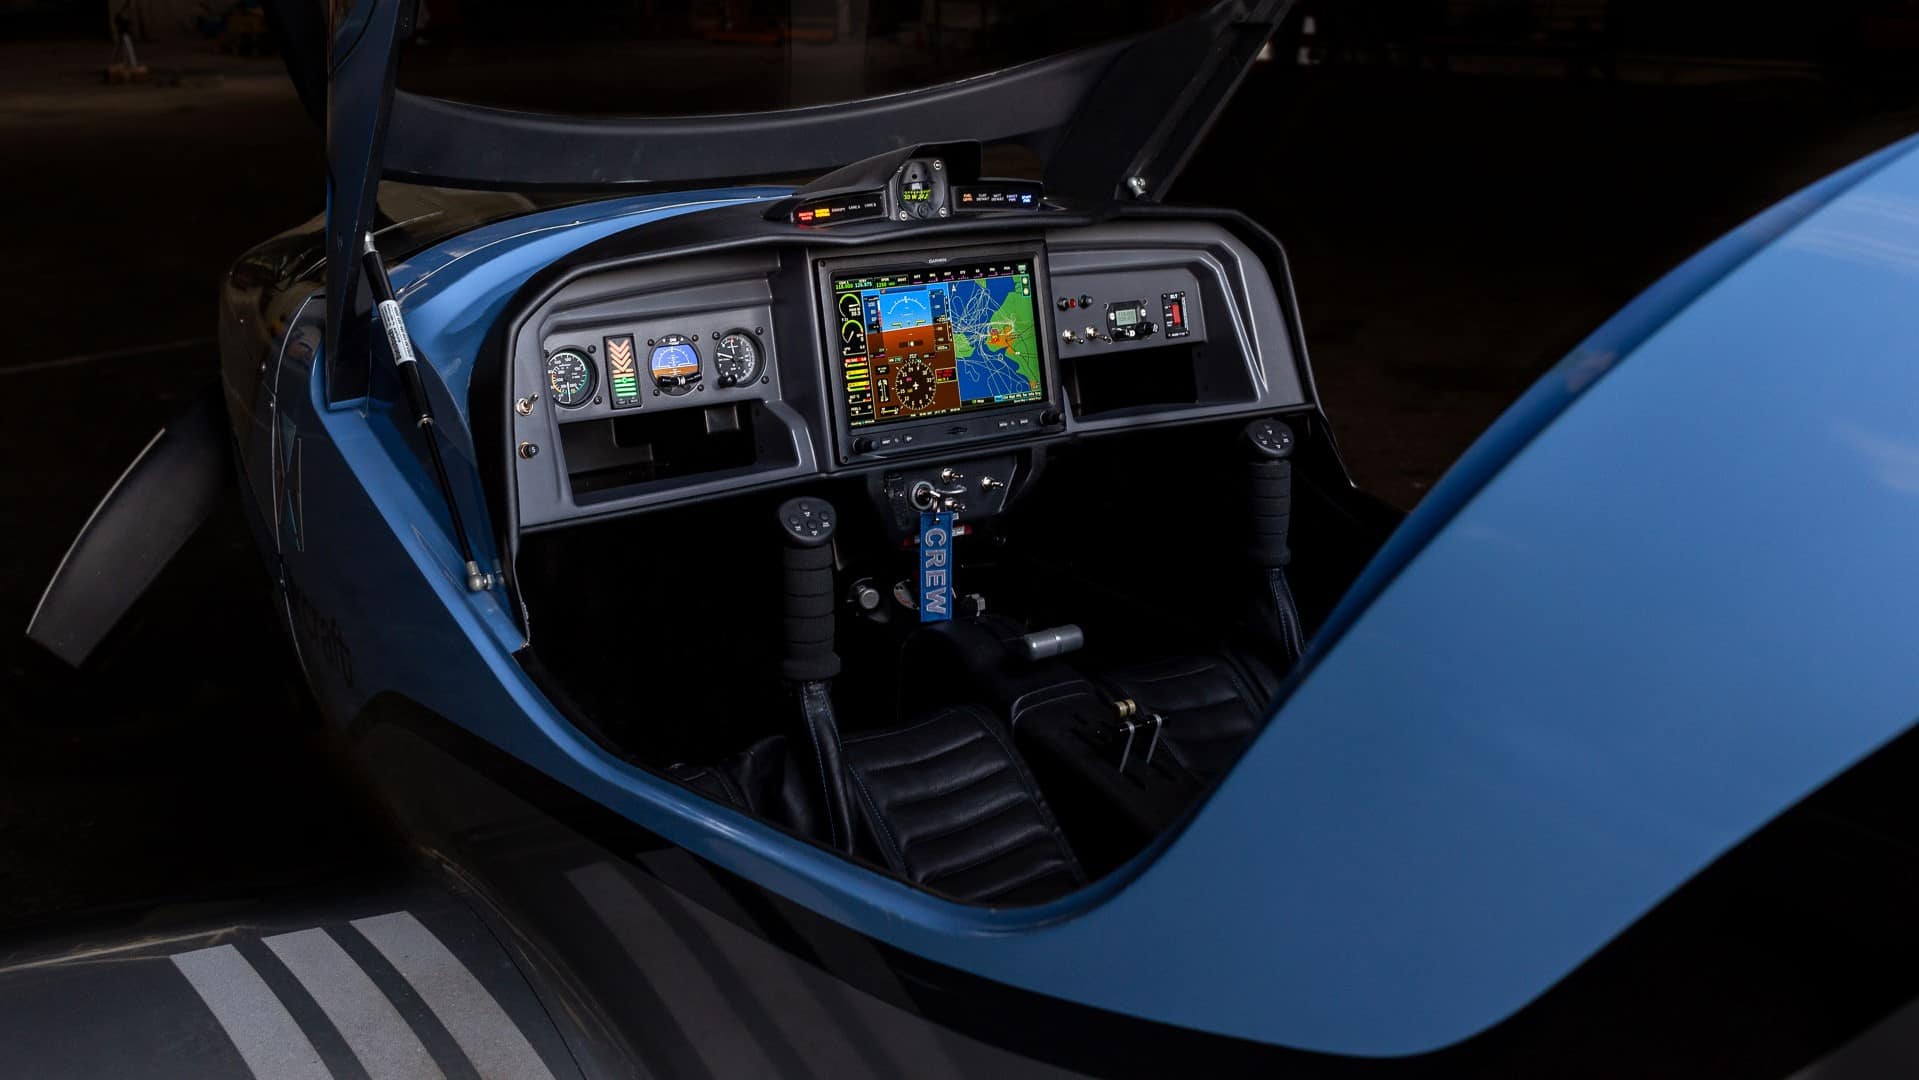 The cockpit of the Elixir is the most simple you can find in a certified aircraft today. The Garmin G3X merges all flight parameters in one screen.